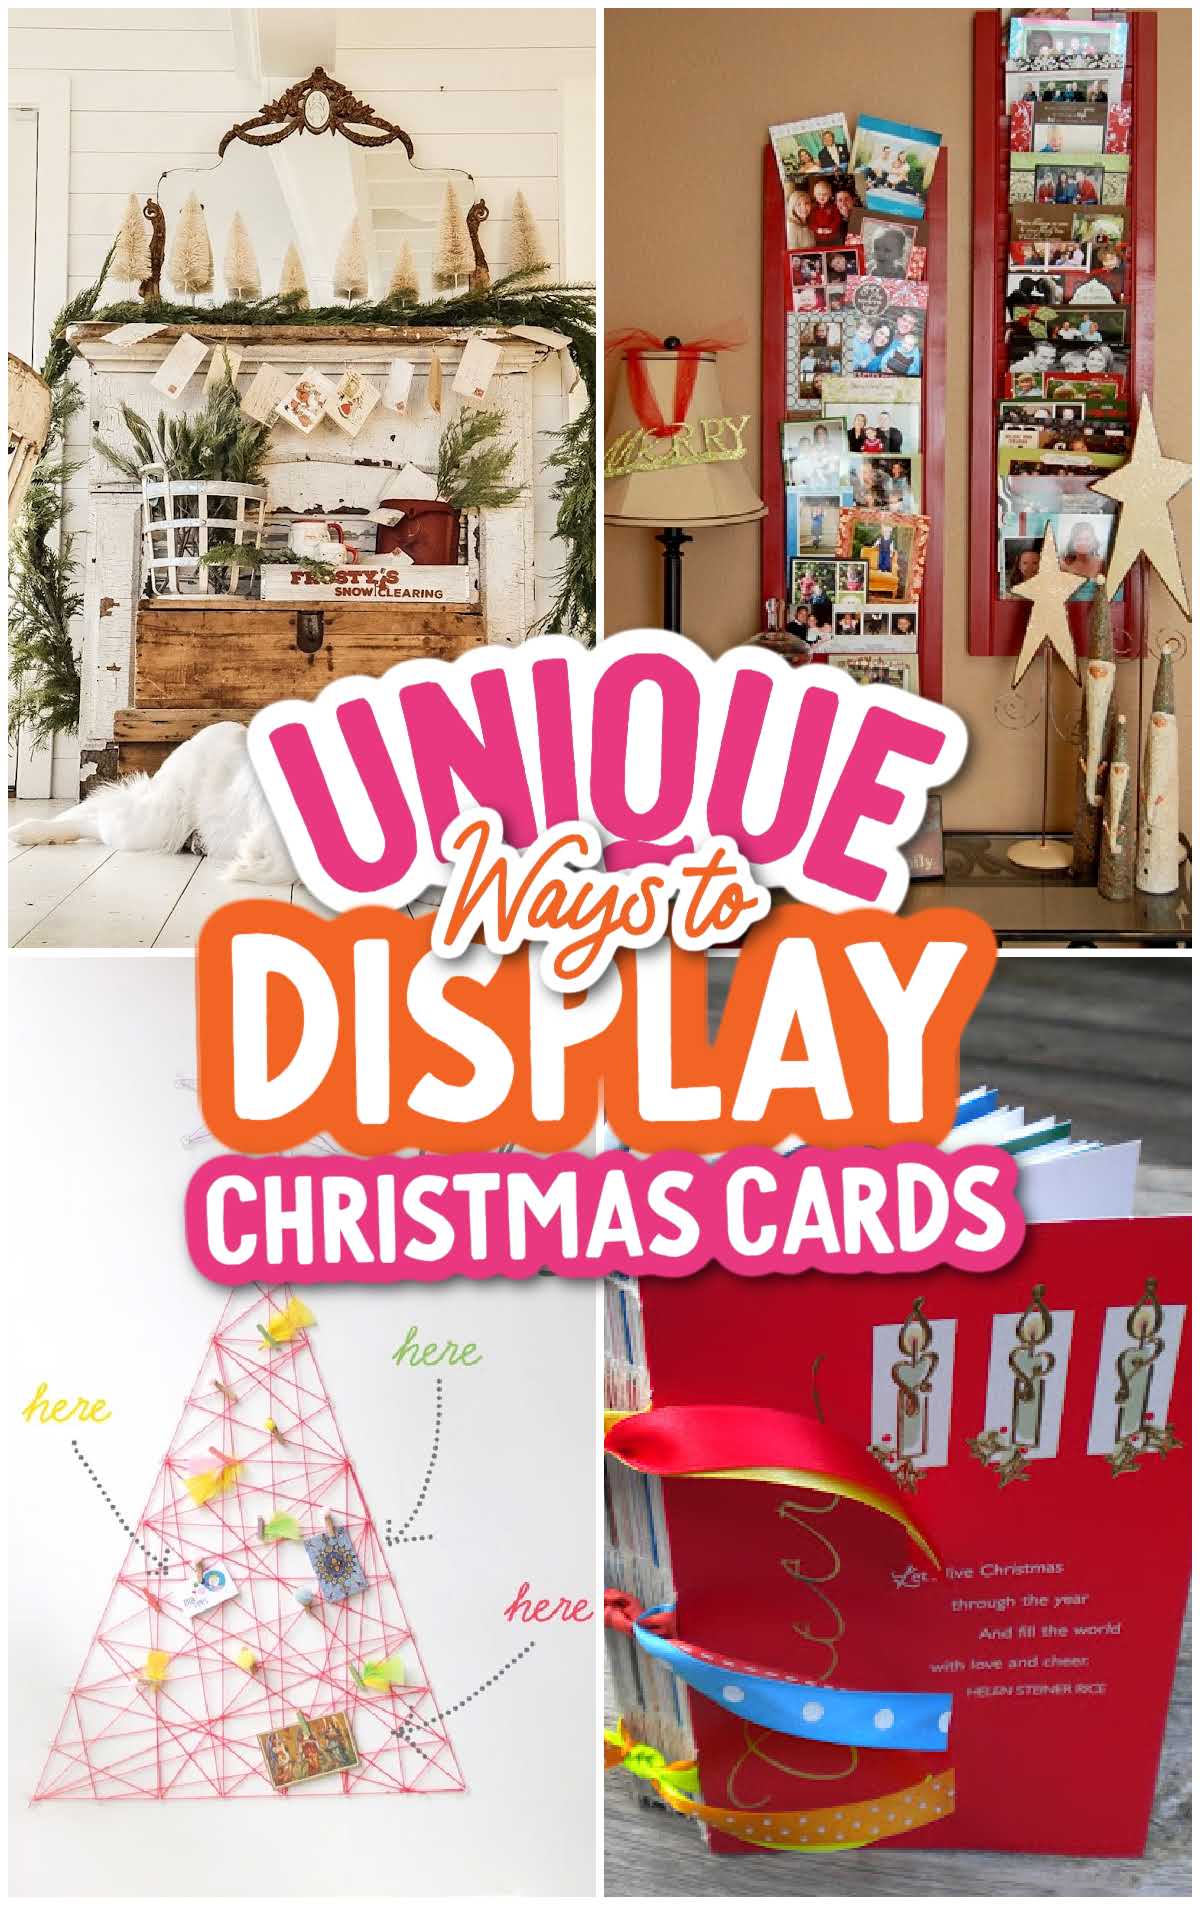 10 Unique Ways To Display Christmas Cards - Spaceships and Laser Beams